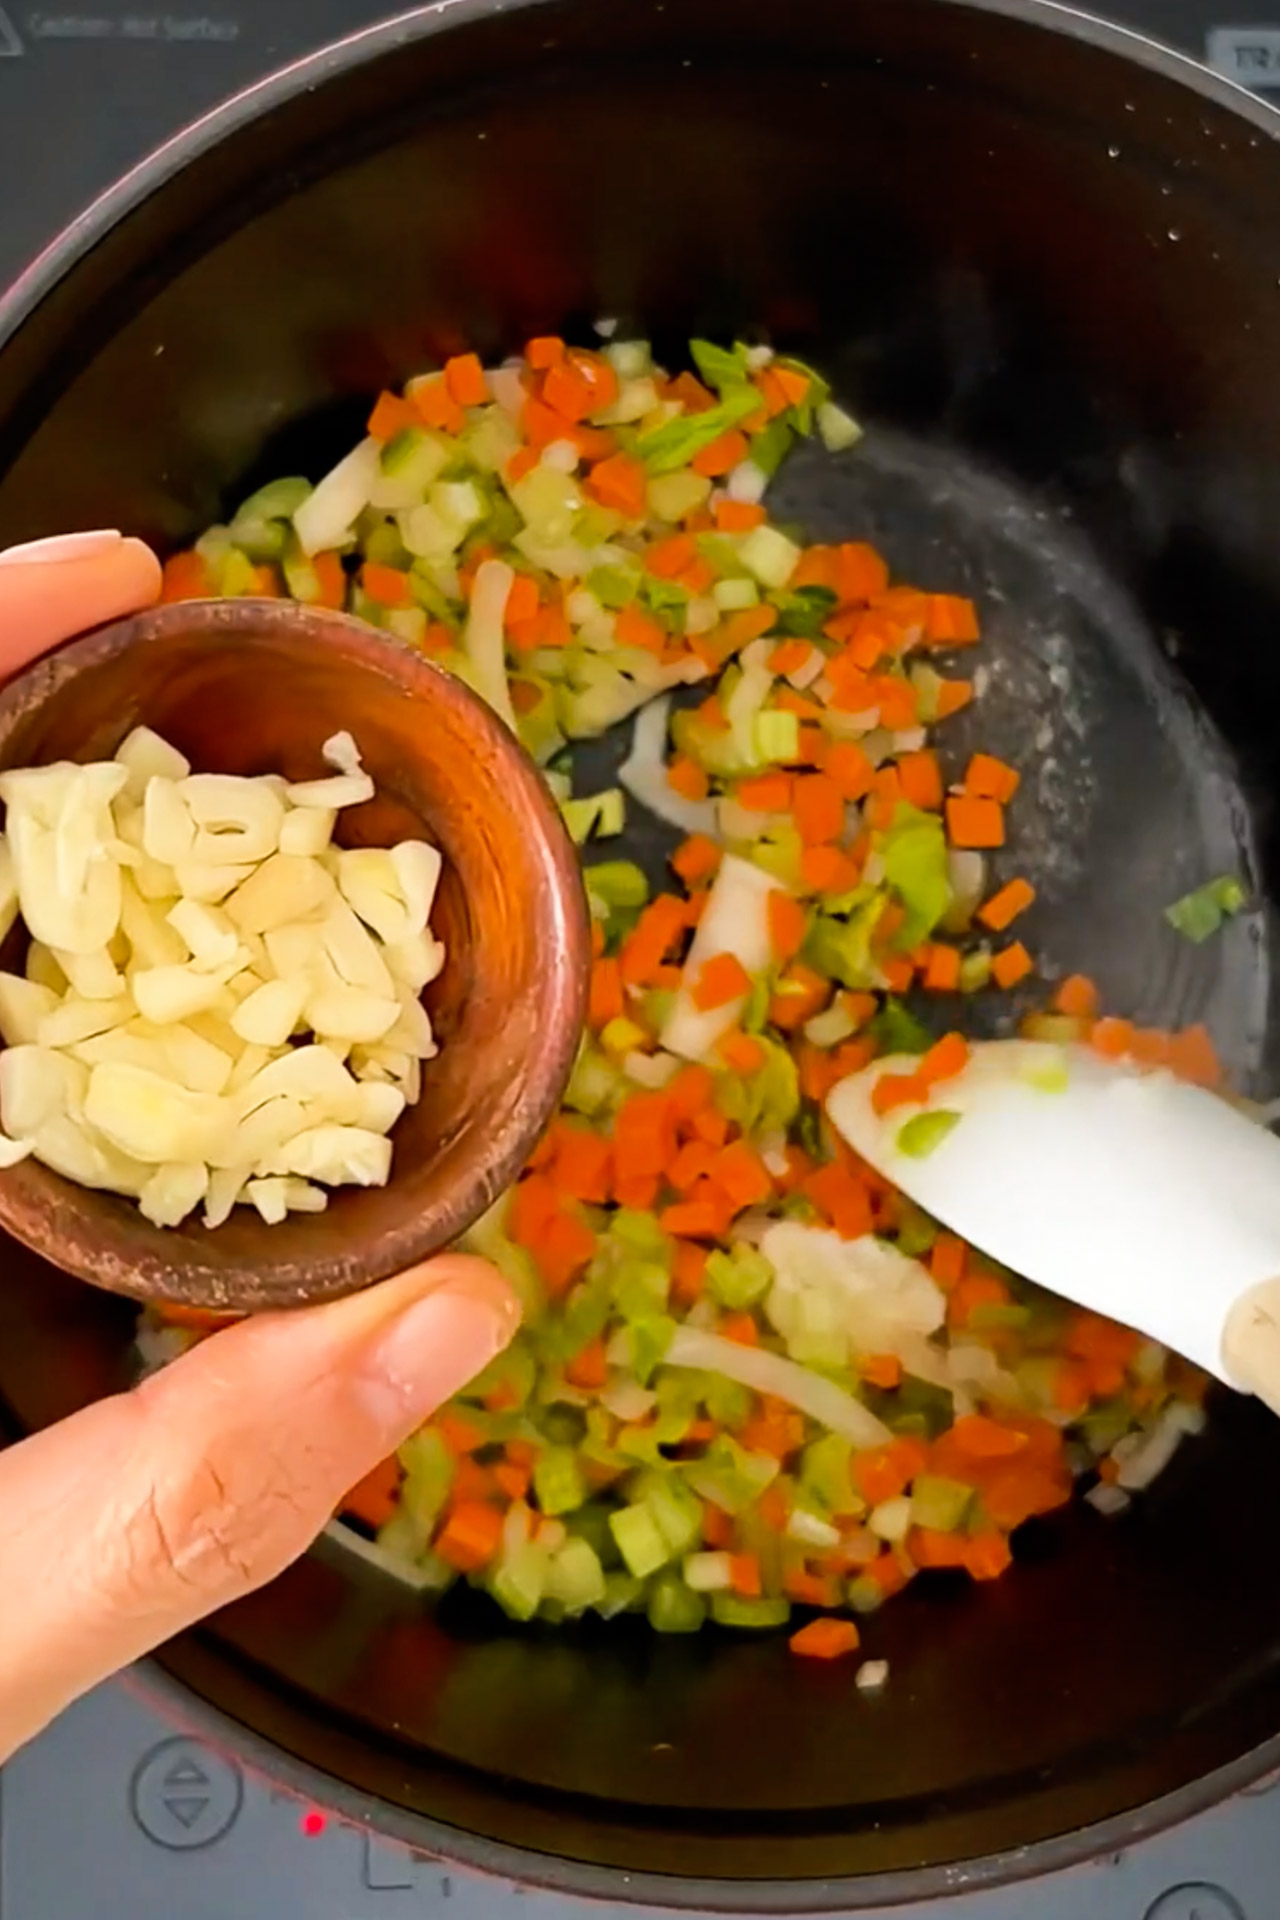 A person is stirring some chopped vegetables in a pan, preparing a vegan soup.